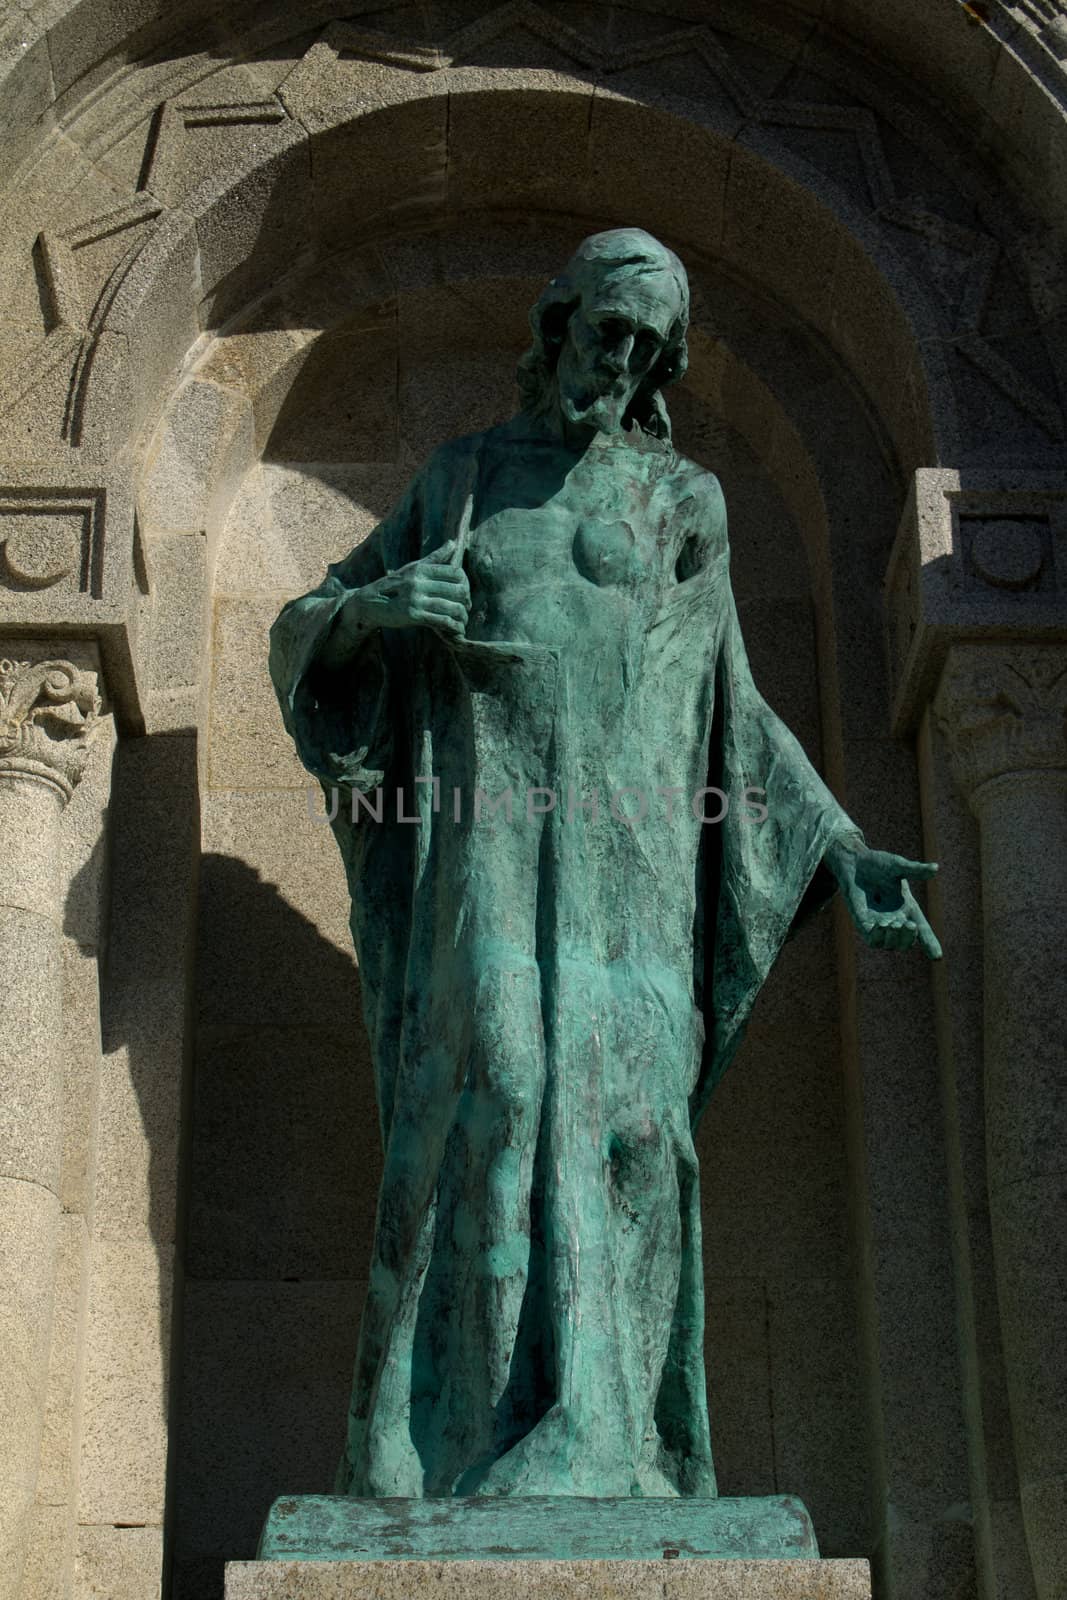 A statue of god in green metal